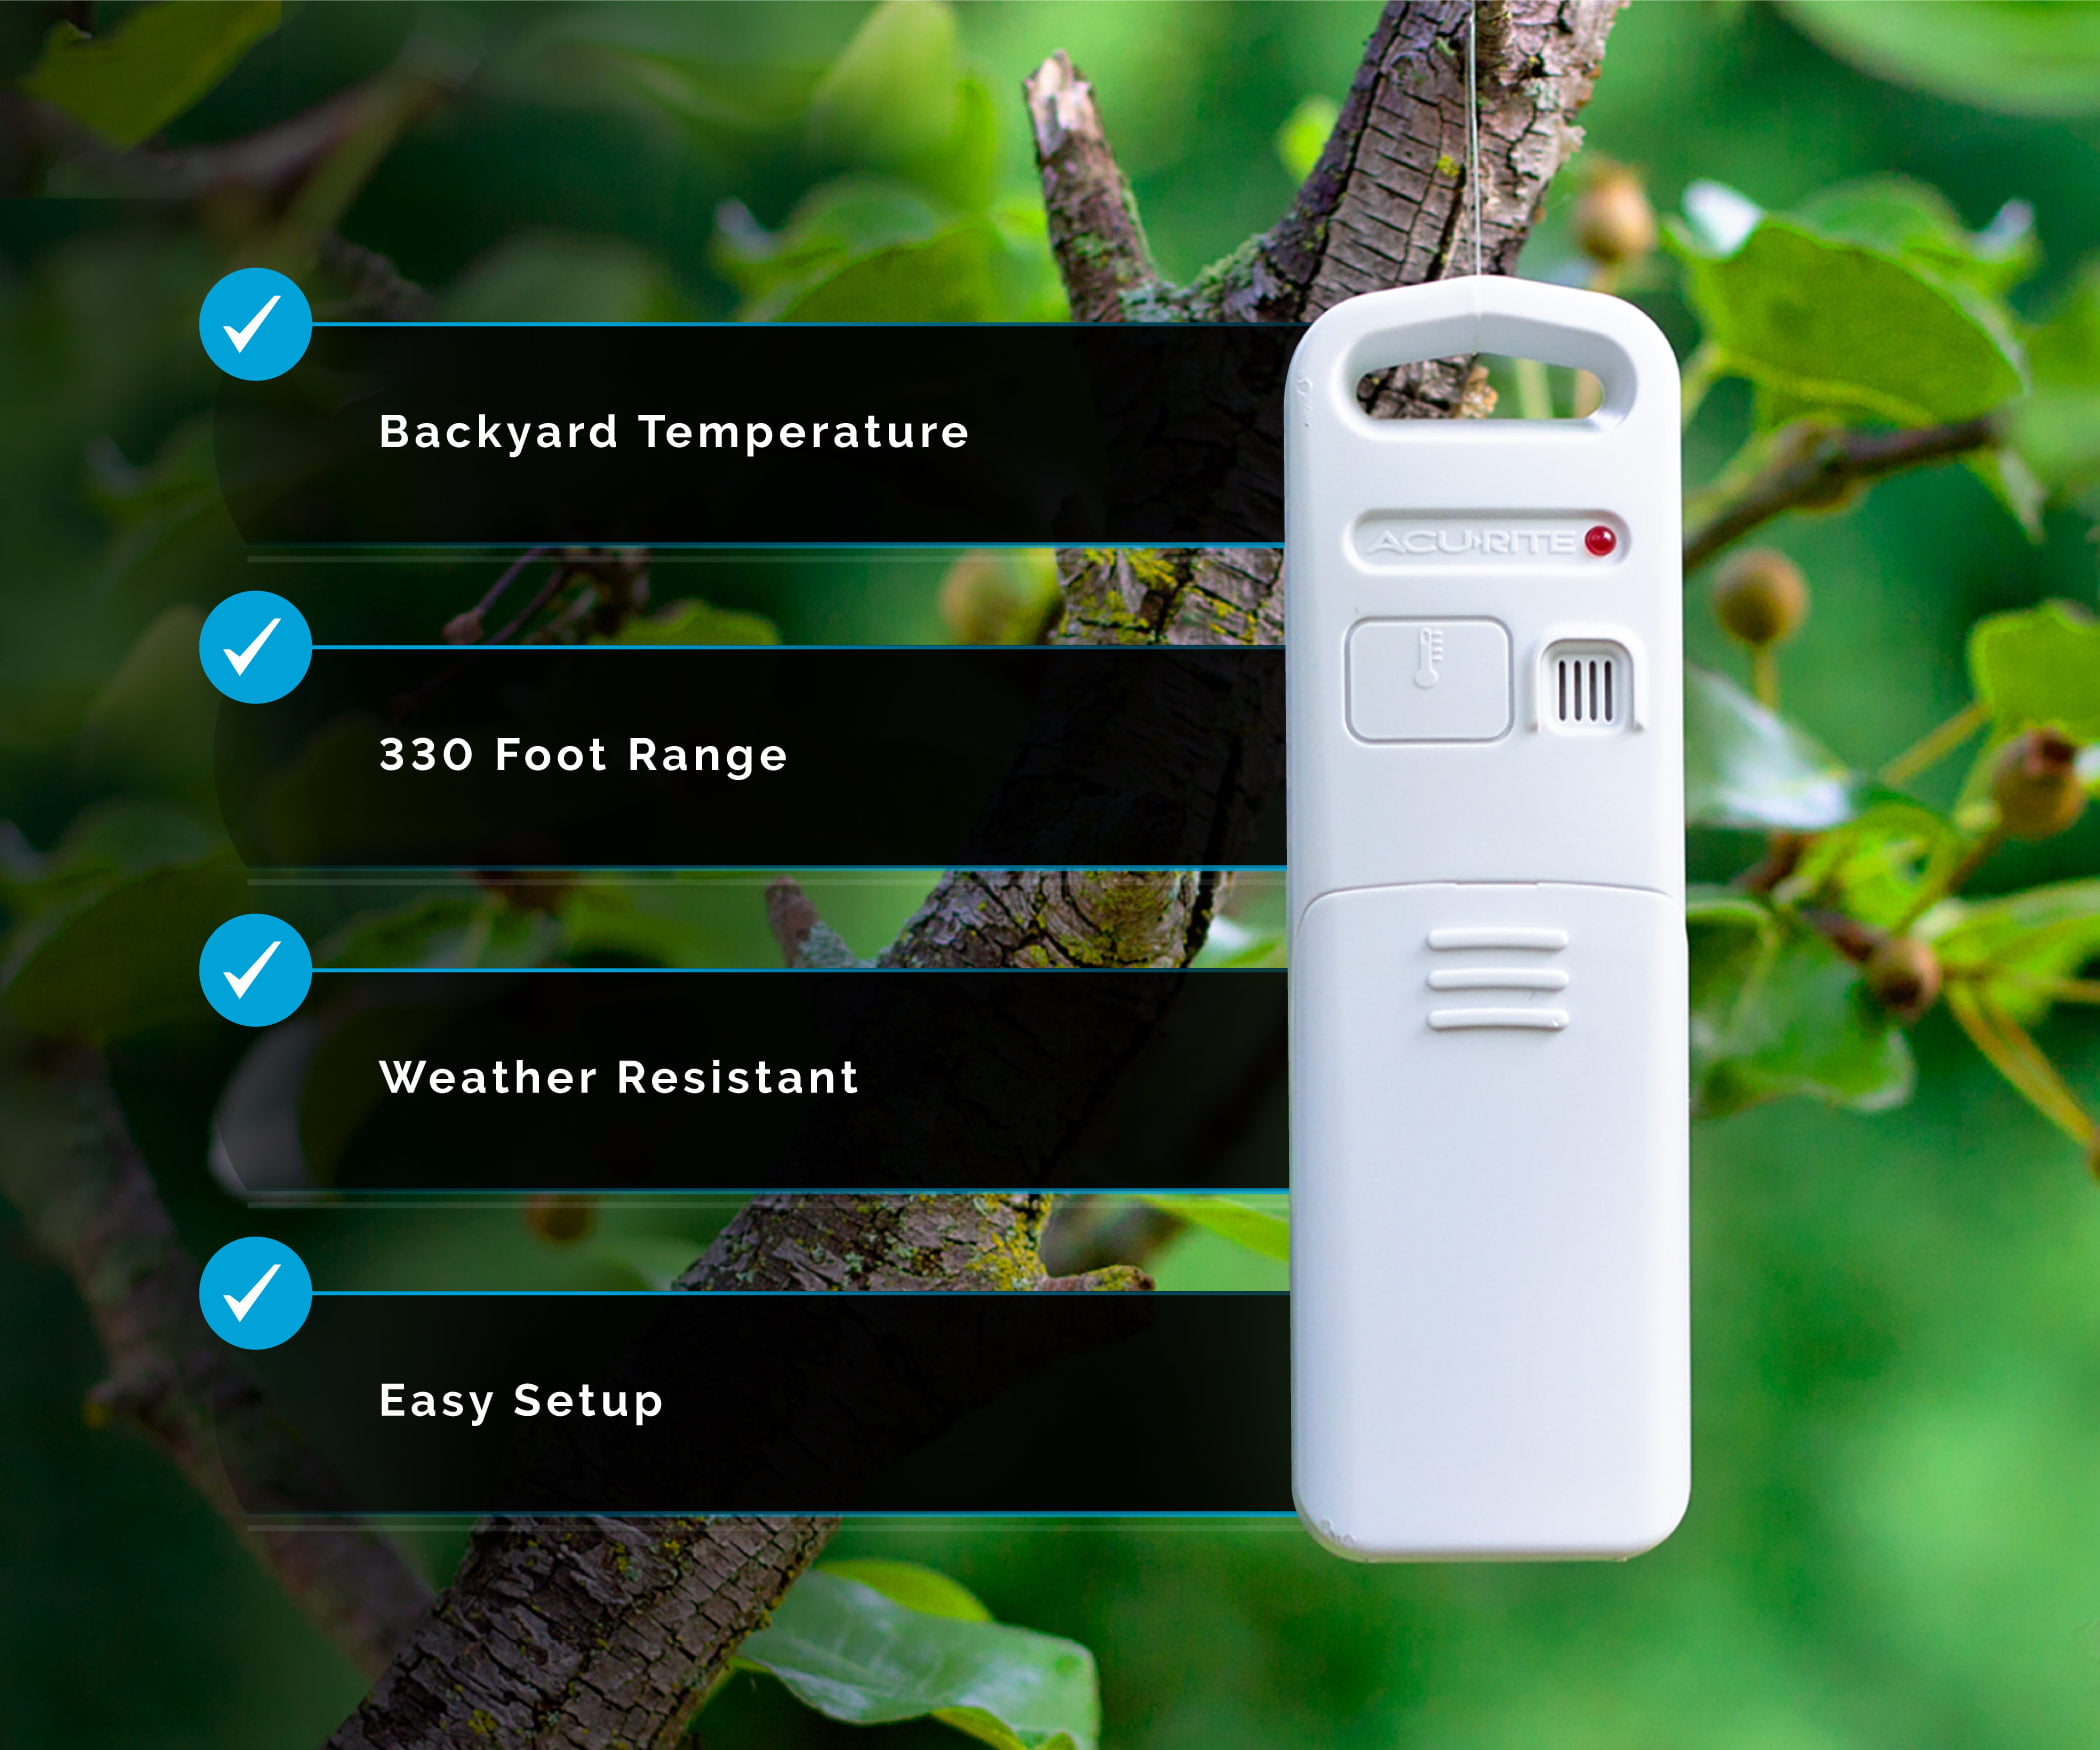  Acu-Rite Deluxe Wireless Weather Station with Atomic